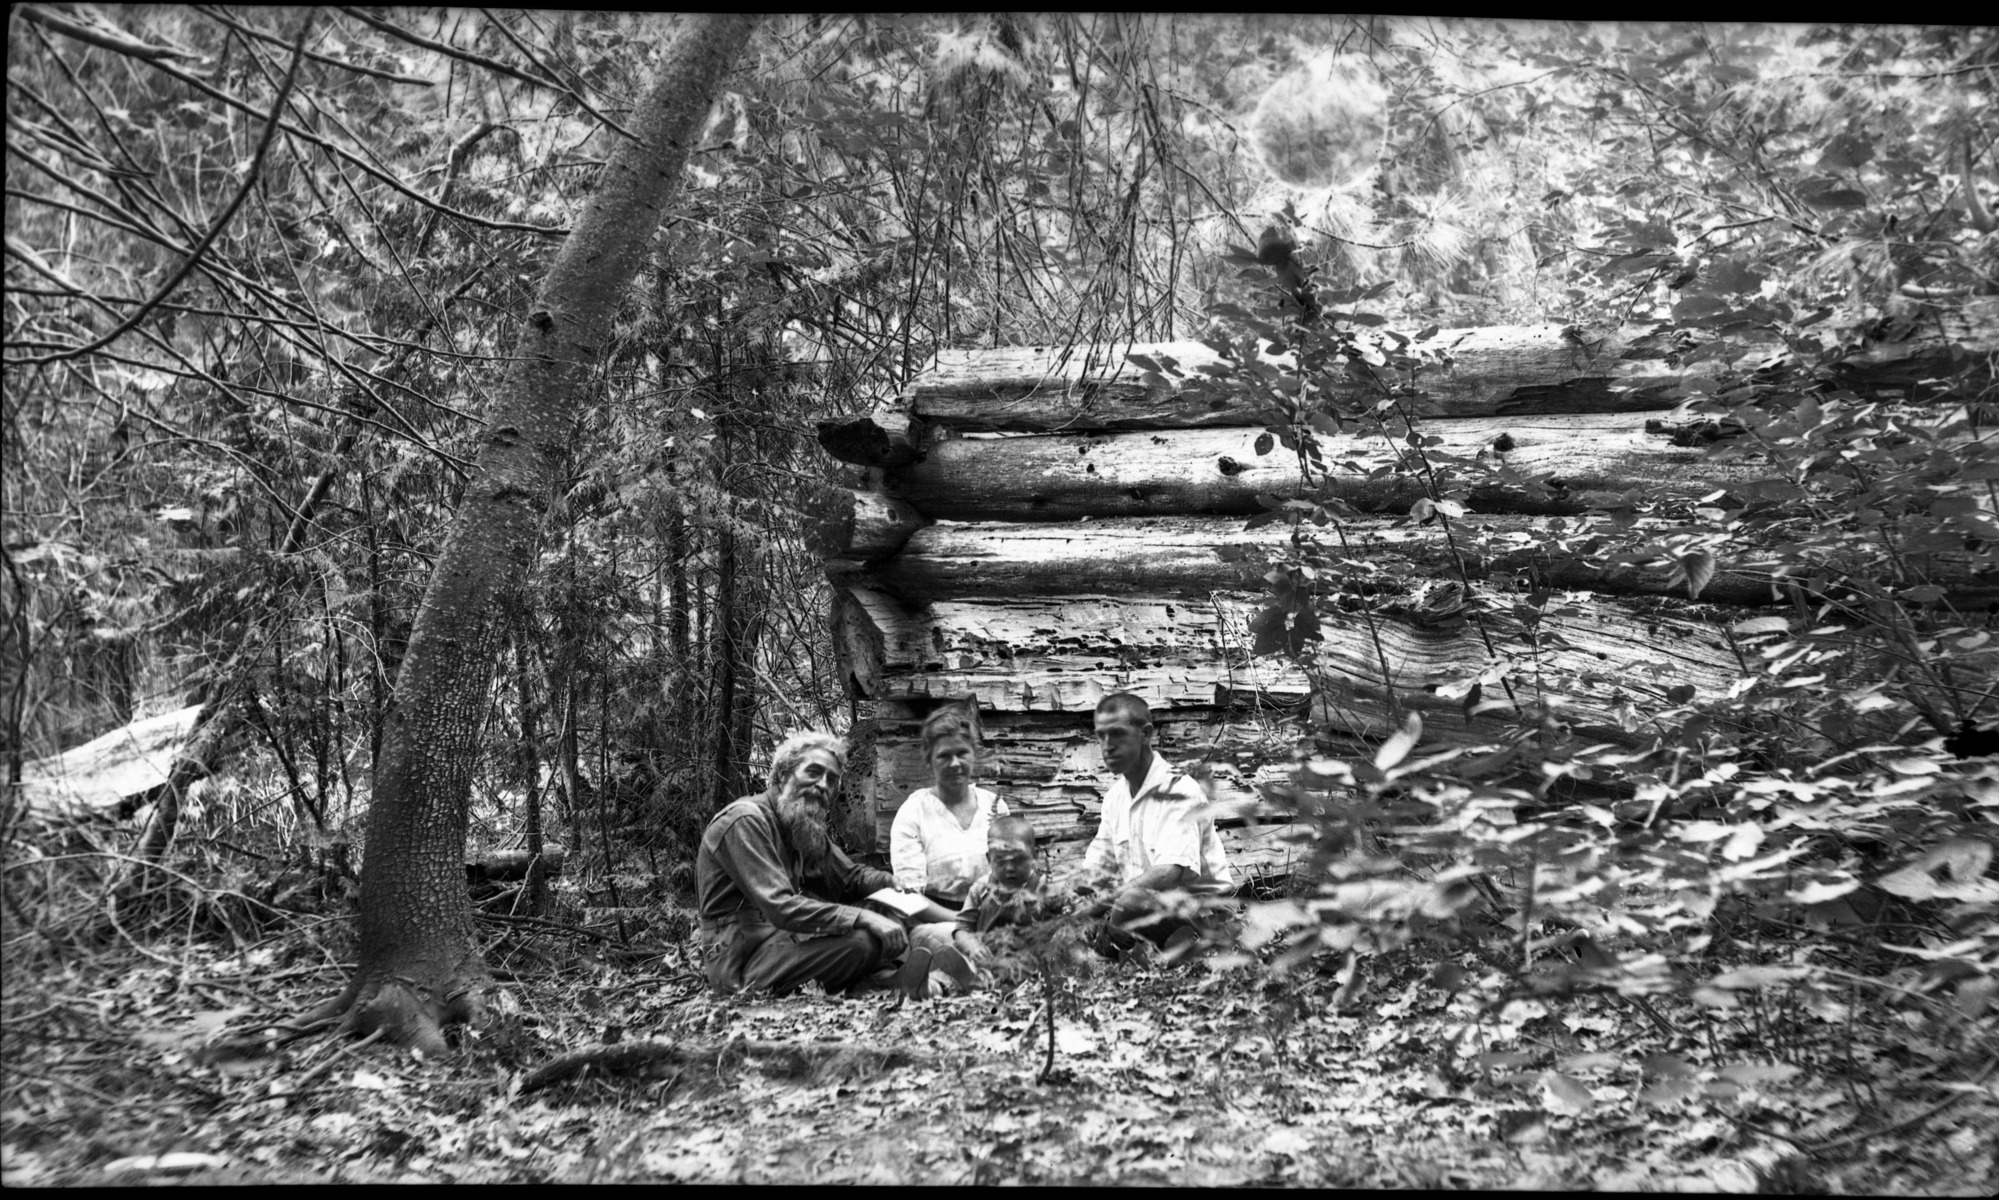 Lost Muir Cabin on Tenaya Creek. George Wharton James seated with Dr. Usher, Usher's wife and child. (copy neg of museum #18,564)